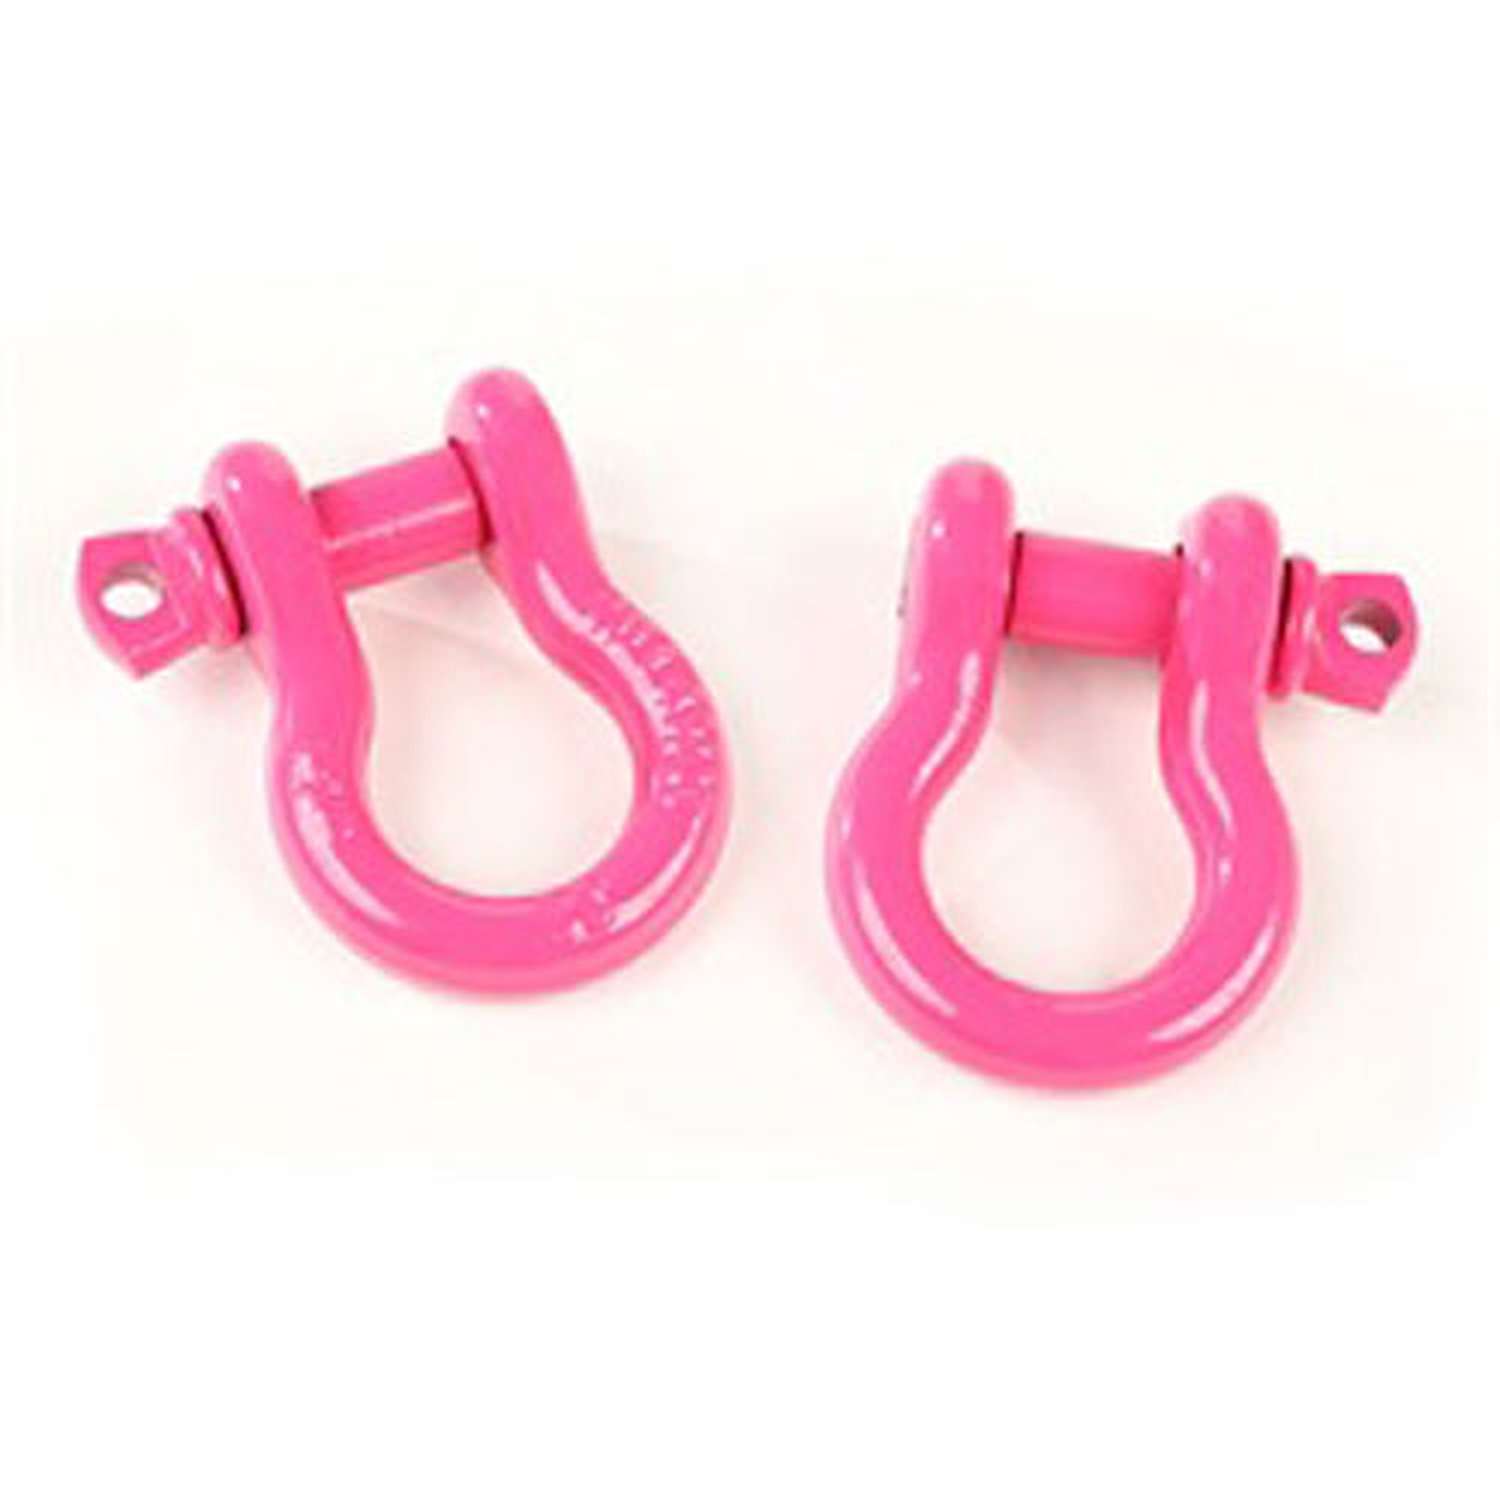 D-SHACKLES 3-4-INCH PIN